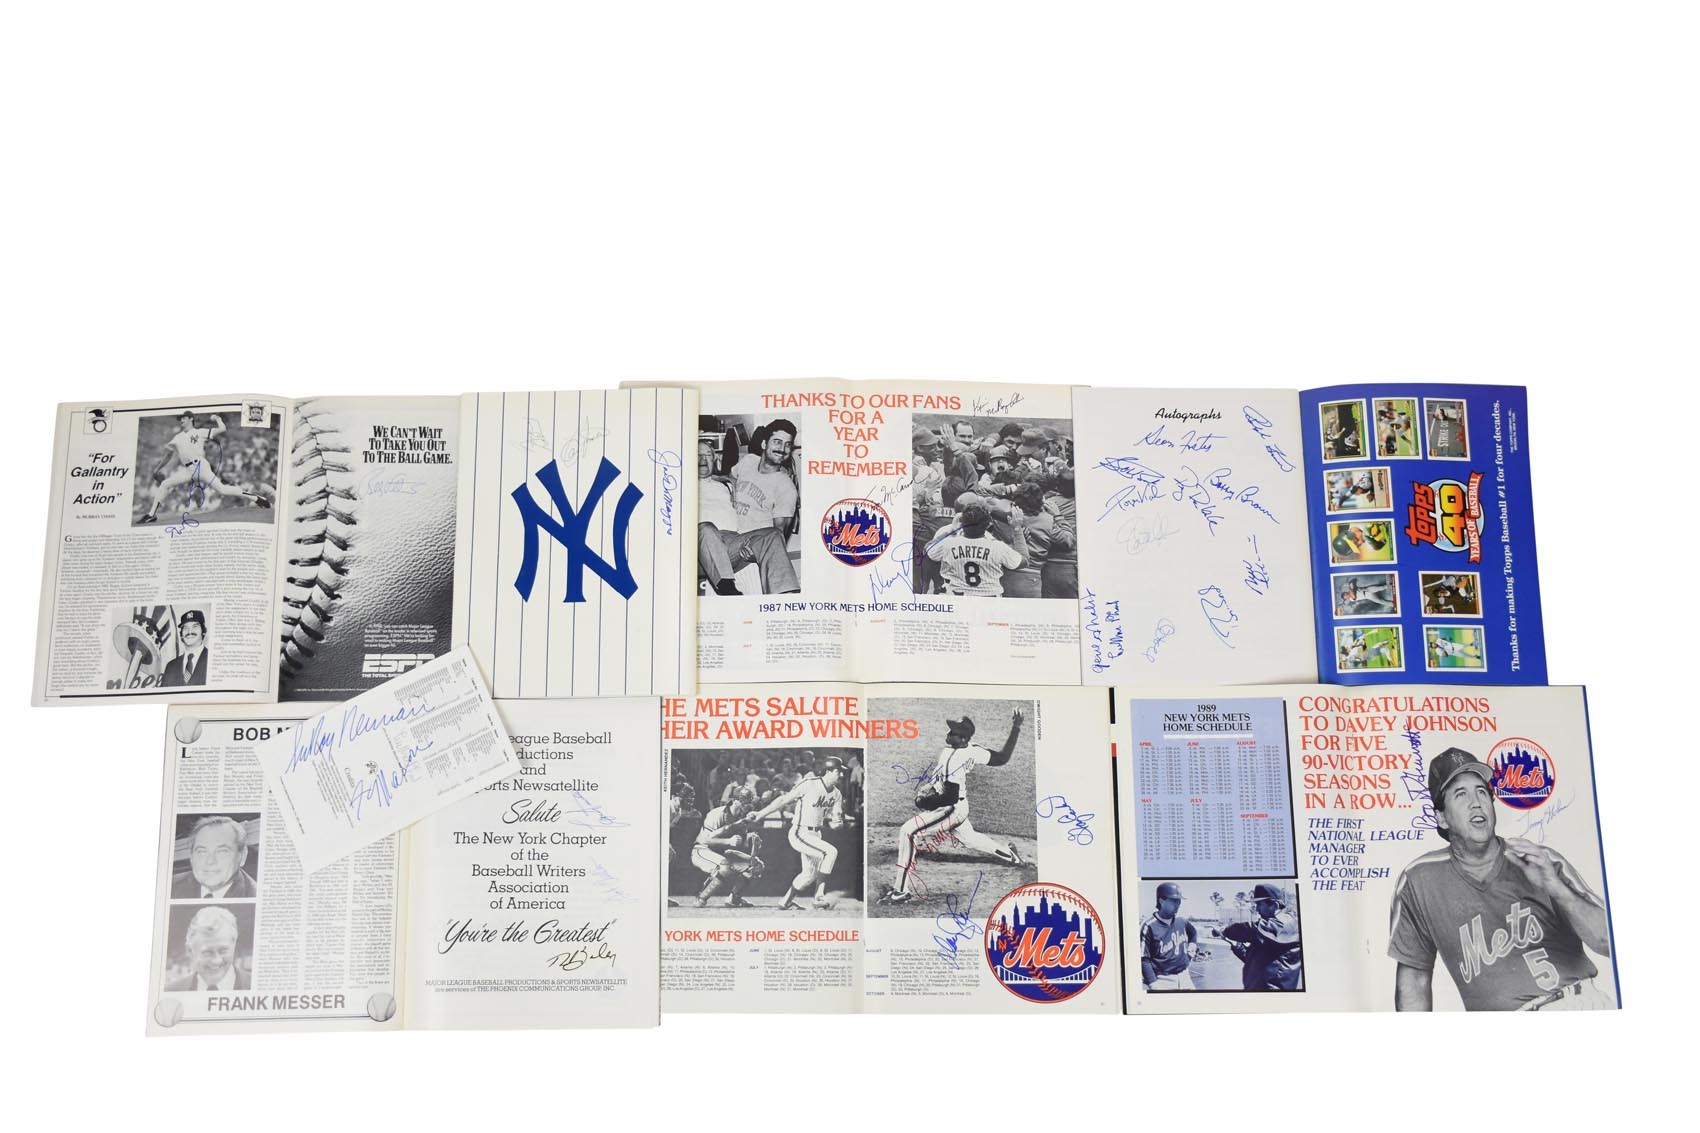 1980s-90s Baseball Writers Signed Programs Obtained by Attendee (137 Signatures)